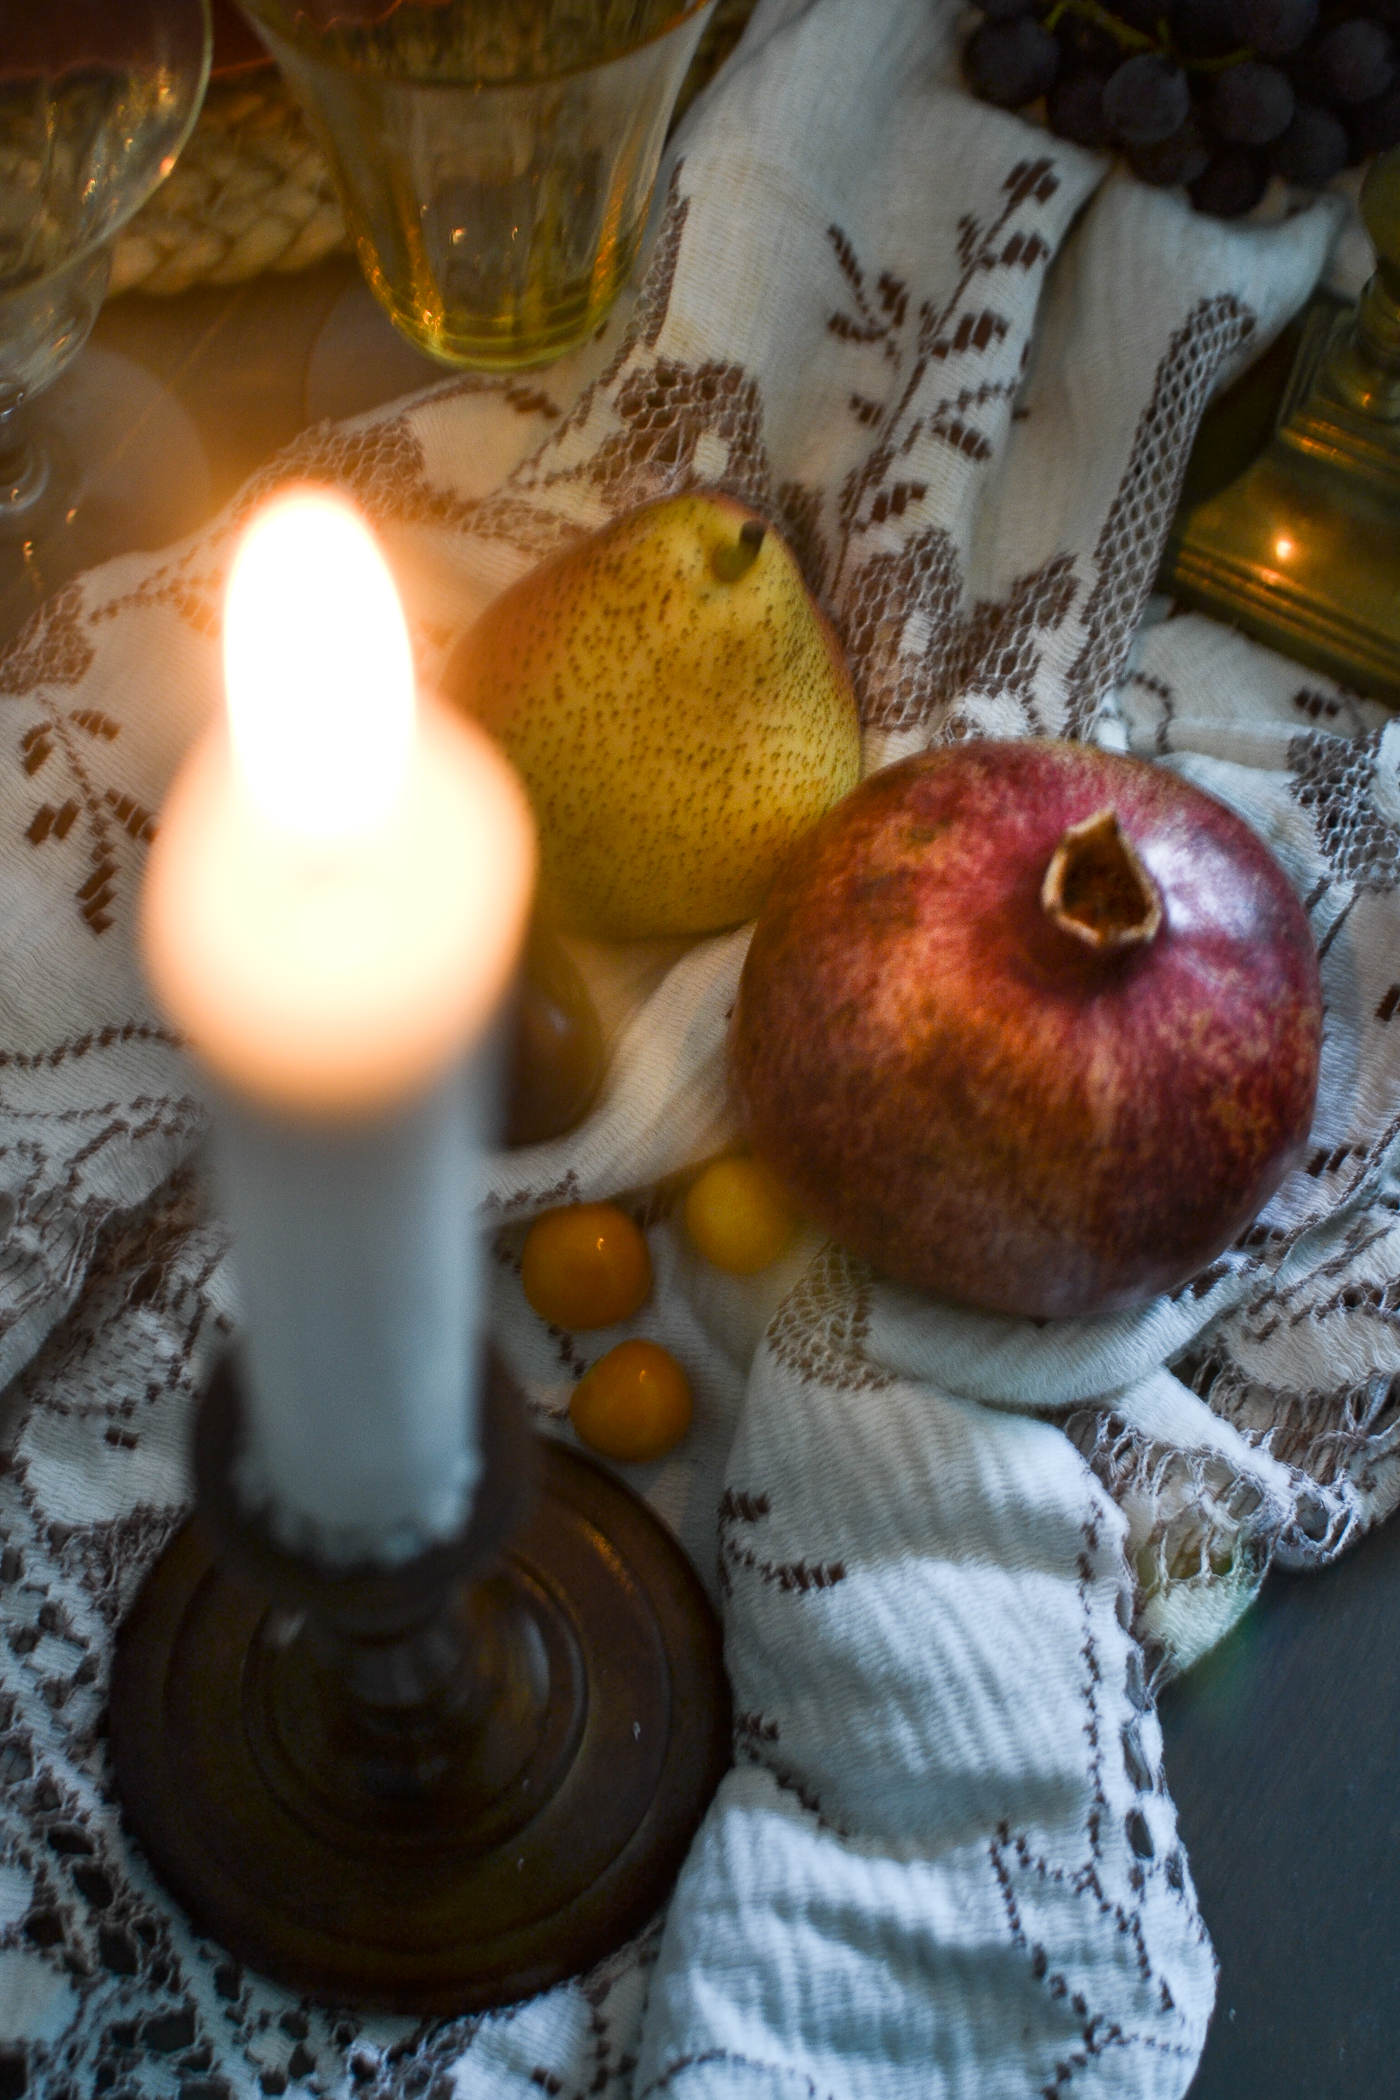 pomegranate and pear beside a burning candle on a dinner table set for autumn.